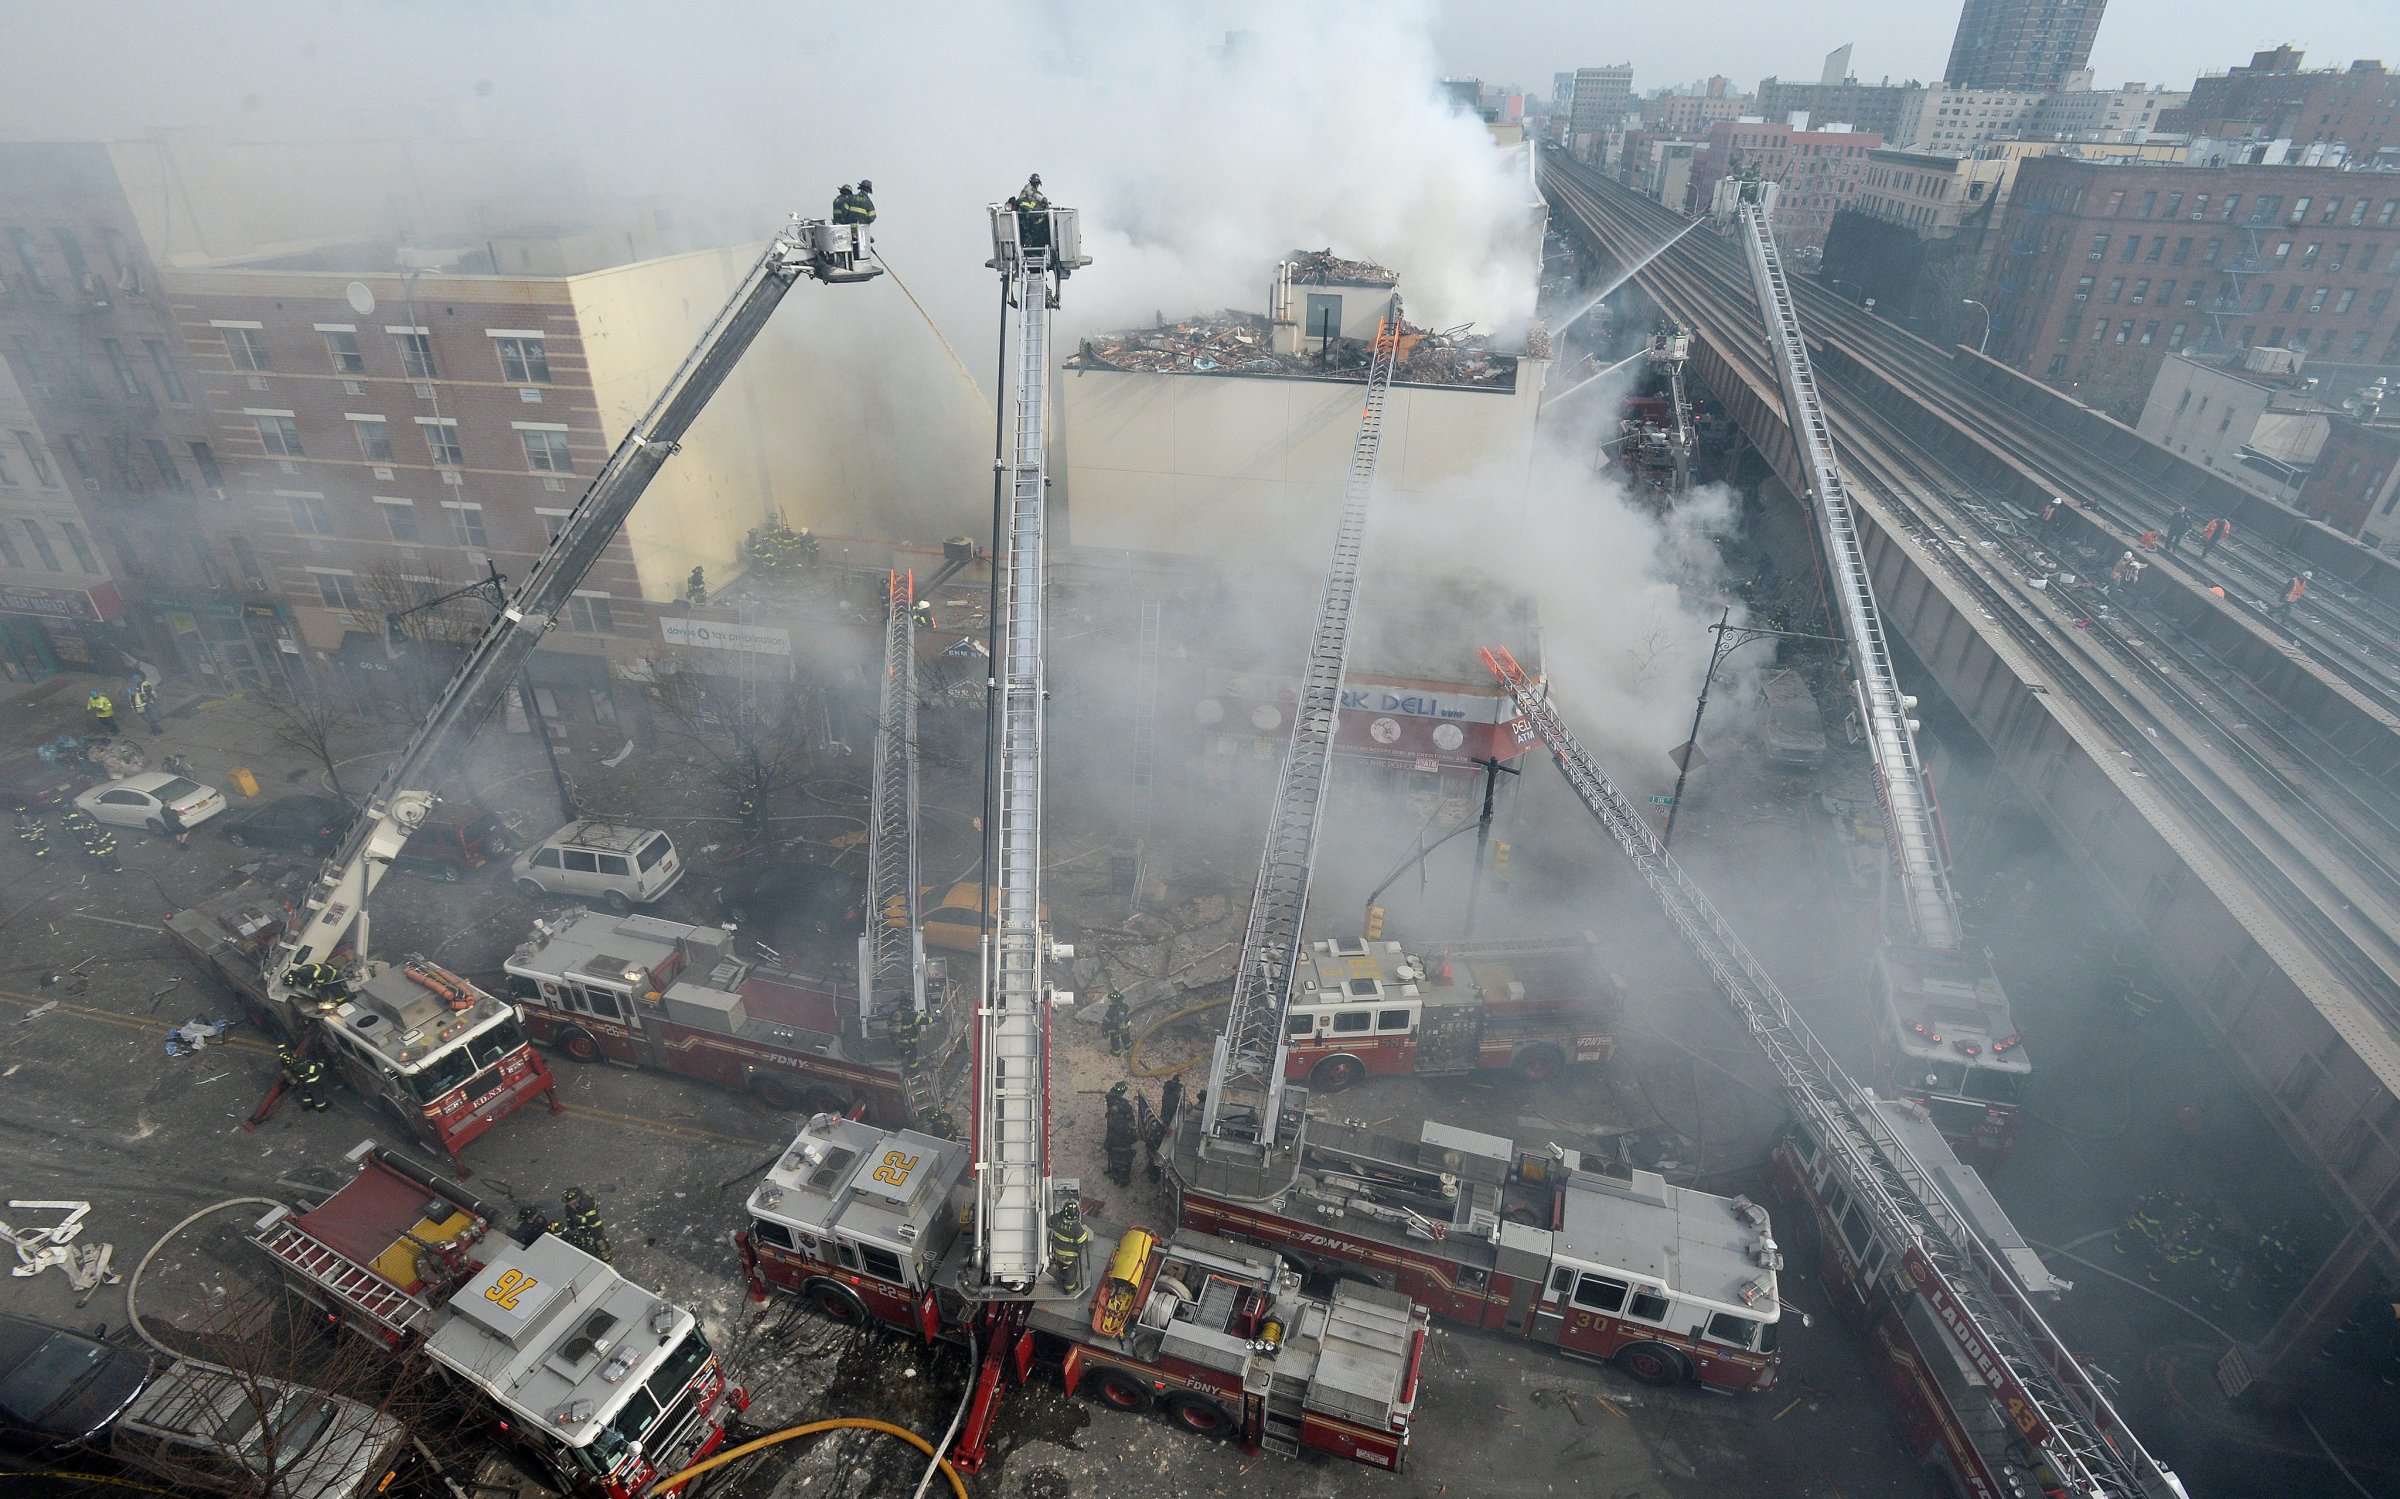 Firefighters extinguish a fire after a reported explosion and building collapse